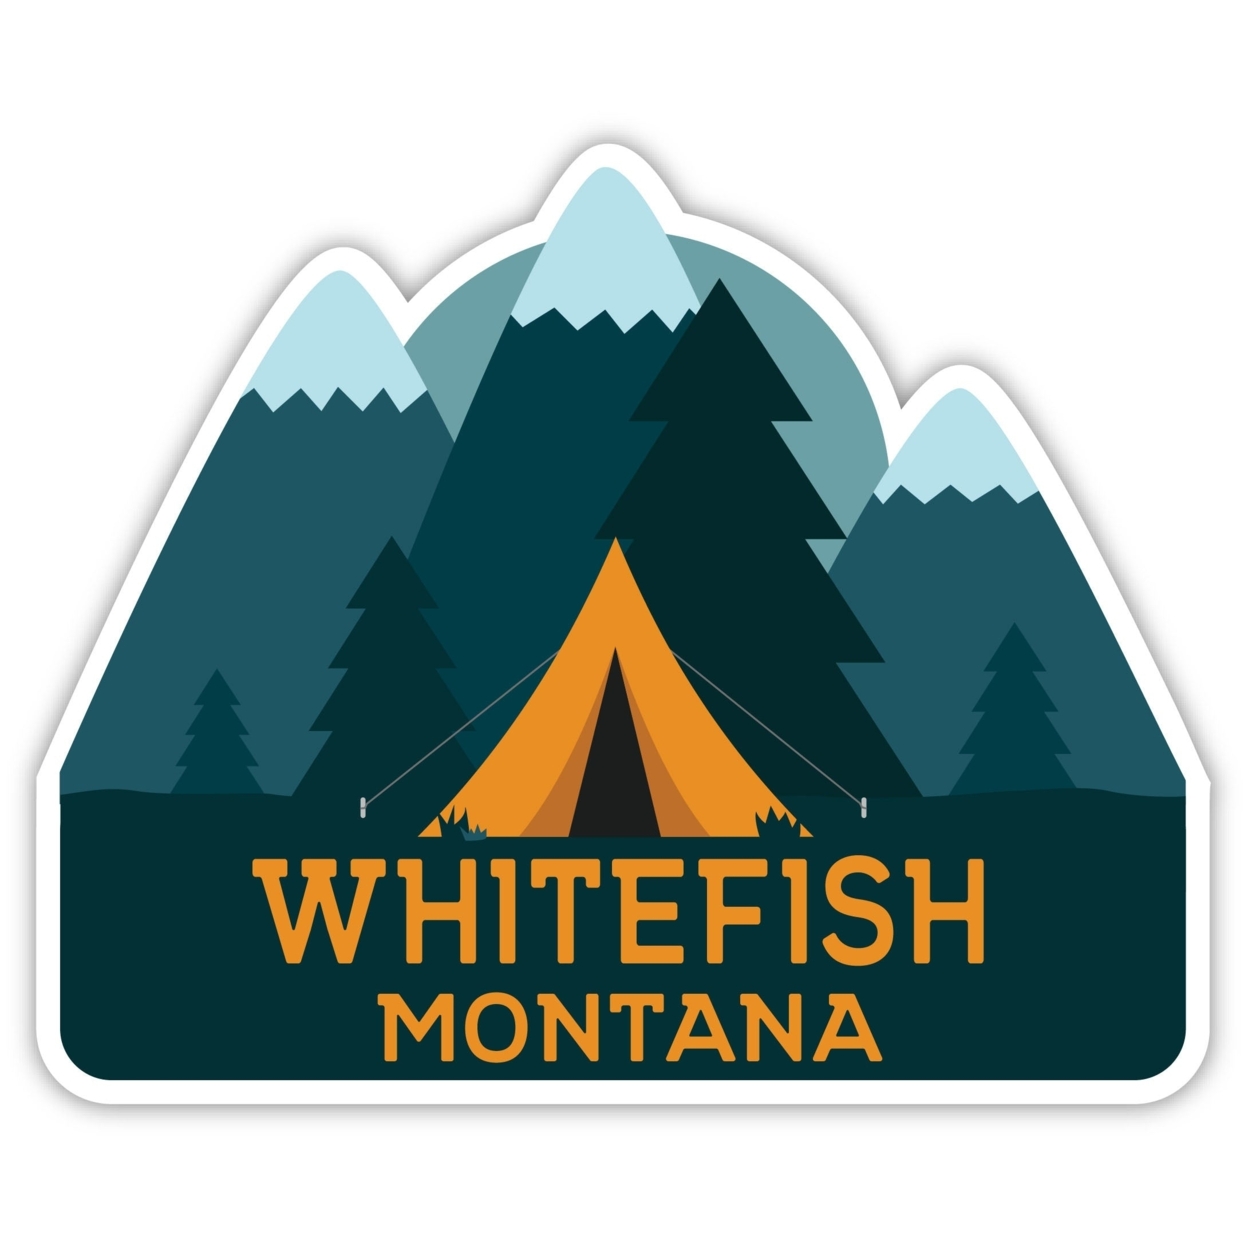 Whitefish Montana Souvenir Decorative Stickers (Choose Theme And Size) - Single Unit, 4-Inch, Camp Life